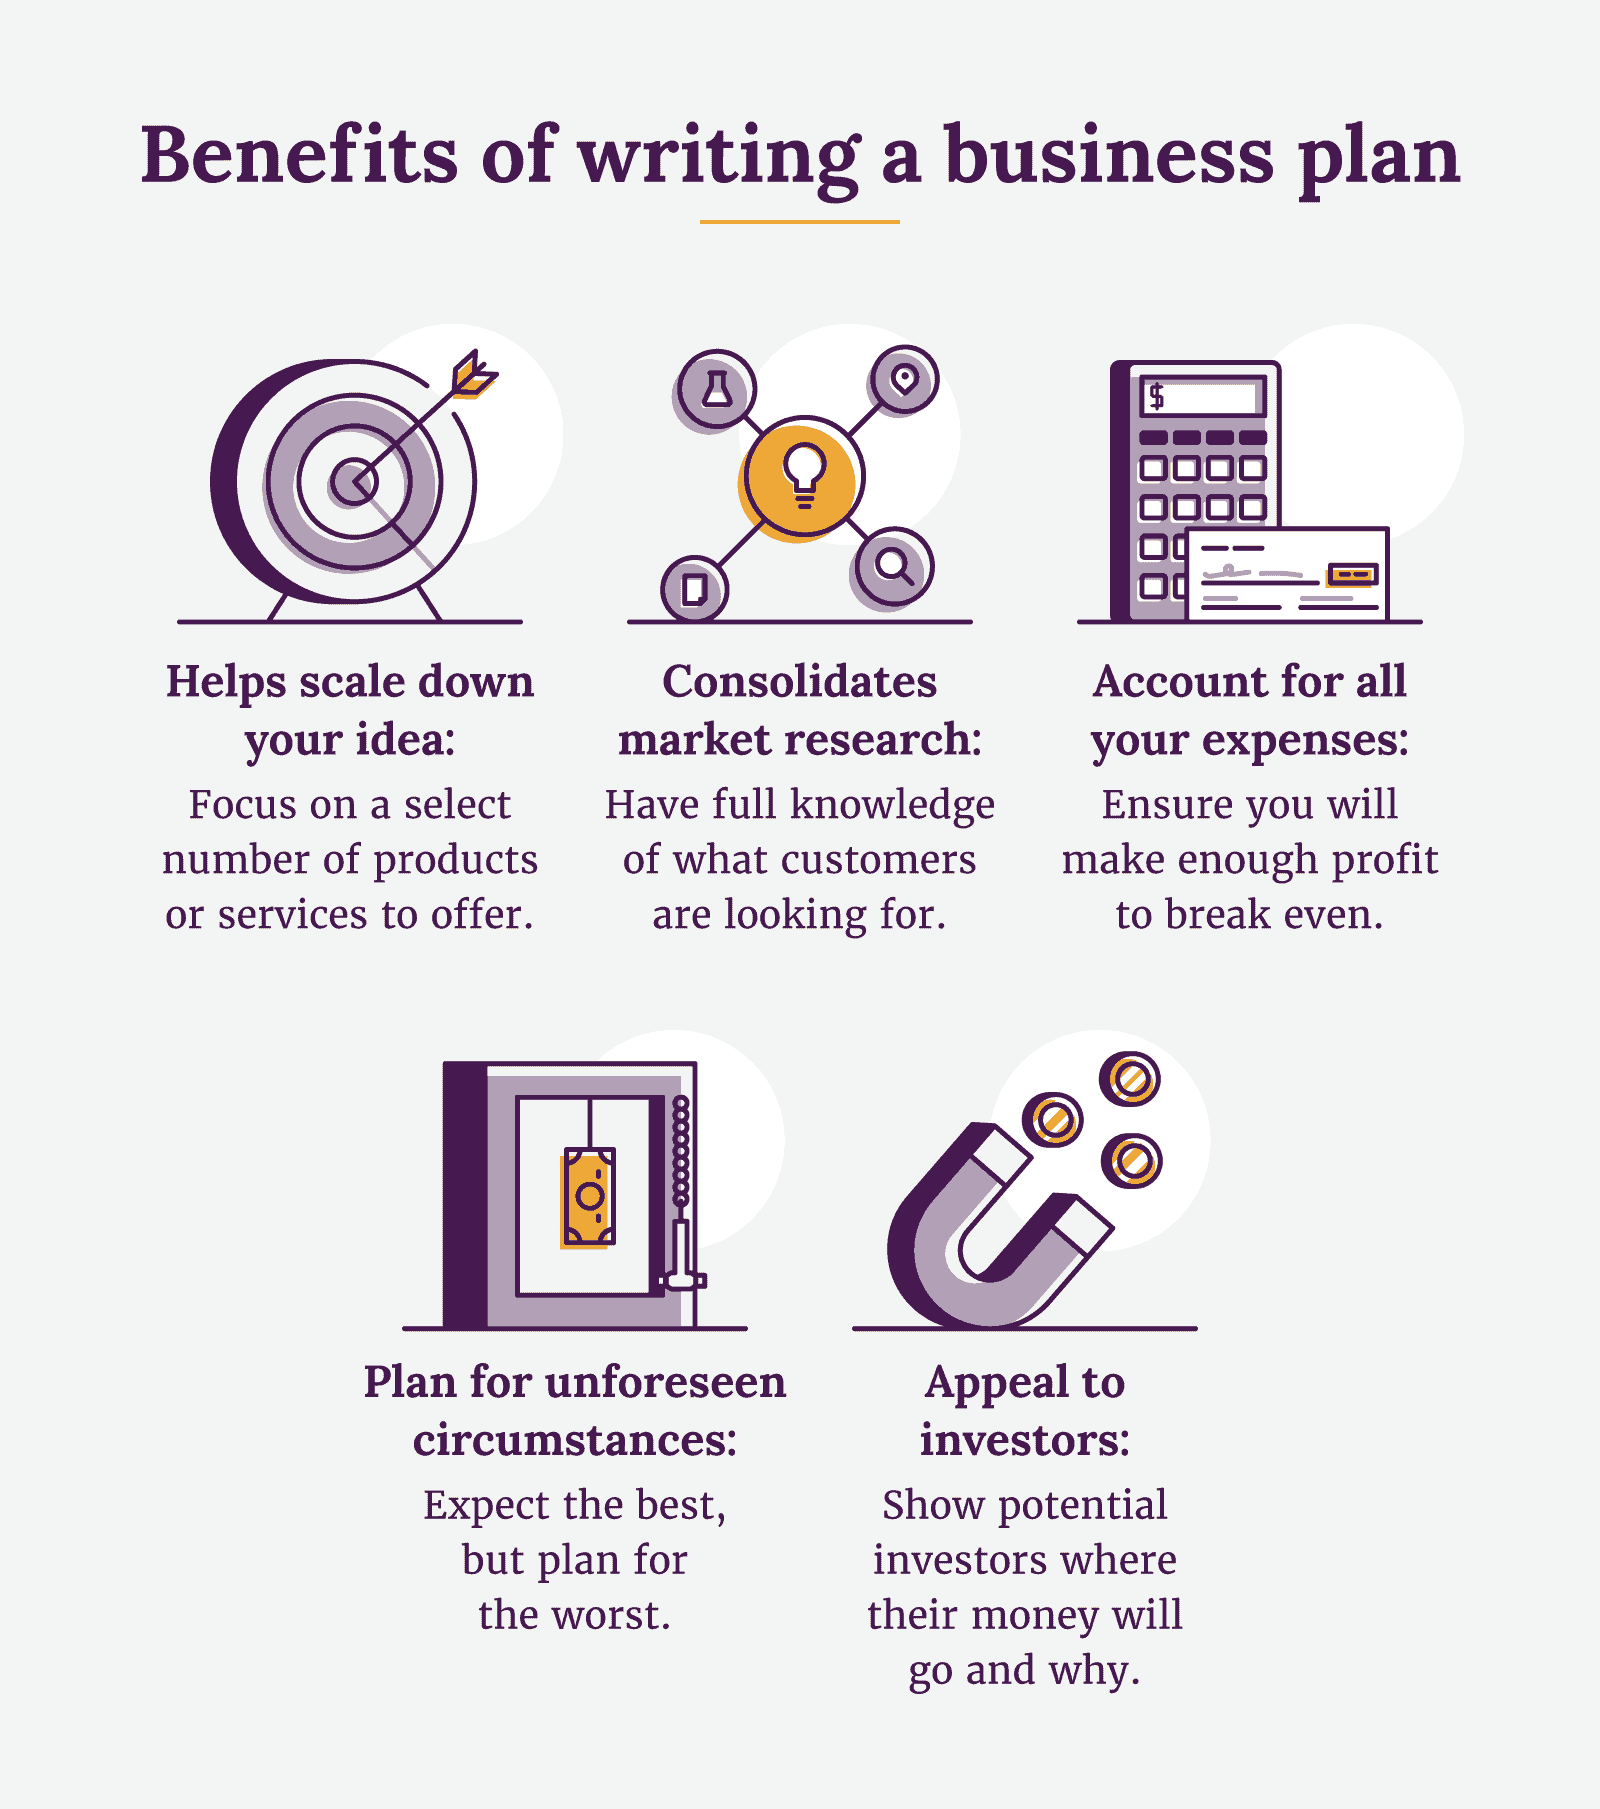 what is one purpose of writing a business plan